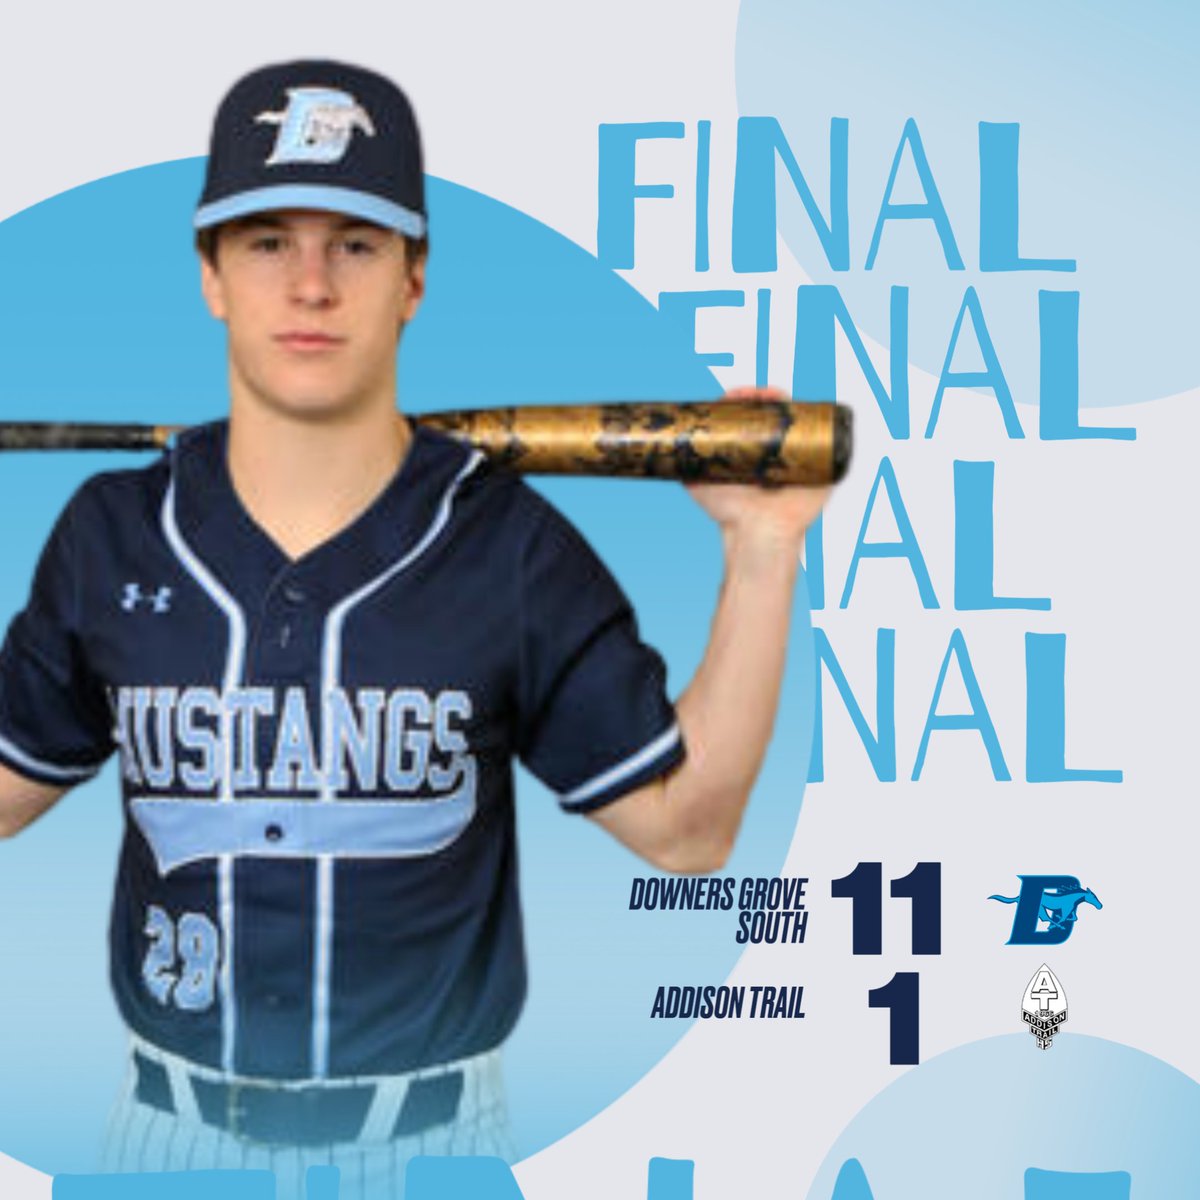 Congratulations to the Baseball team on their Conference victory over Addison Trail. @DgsBaseball #dgspride #southsidestrong